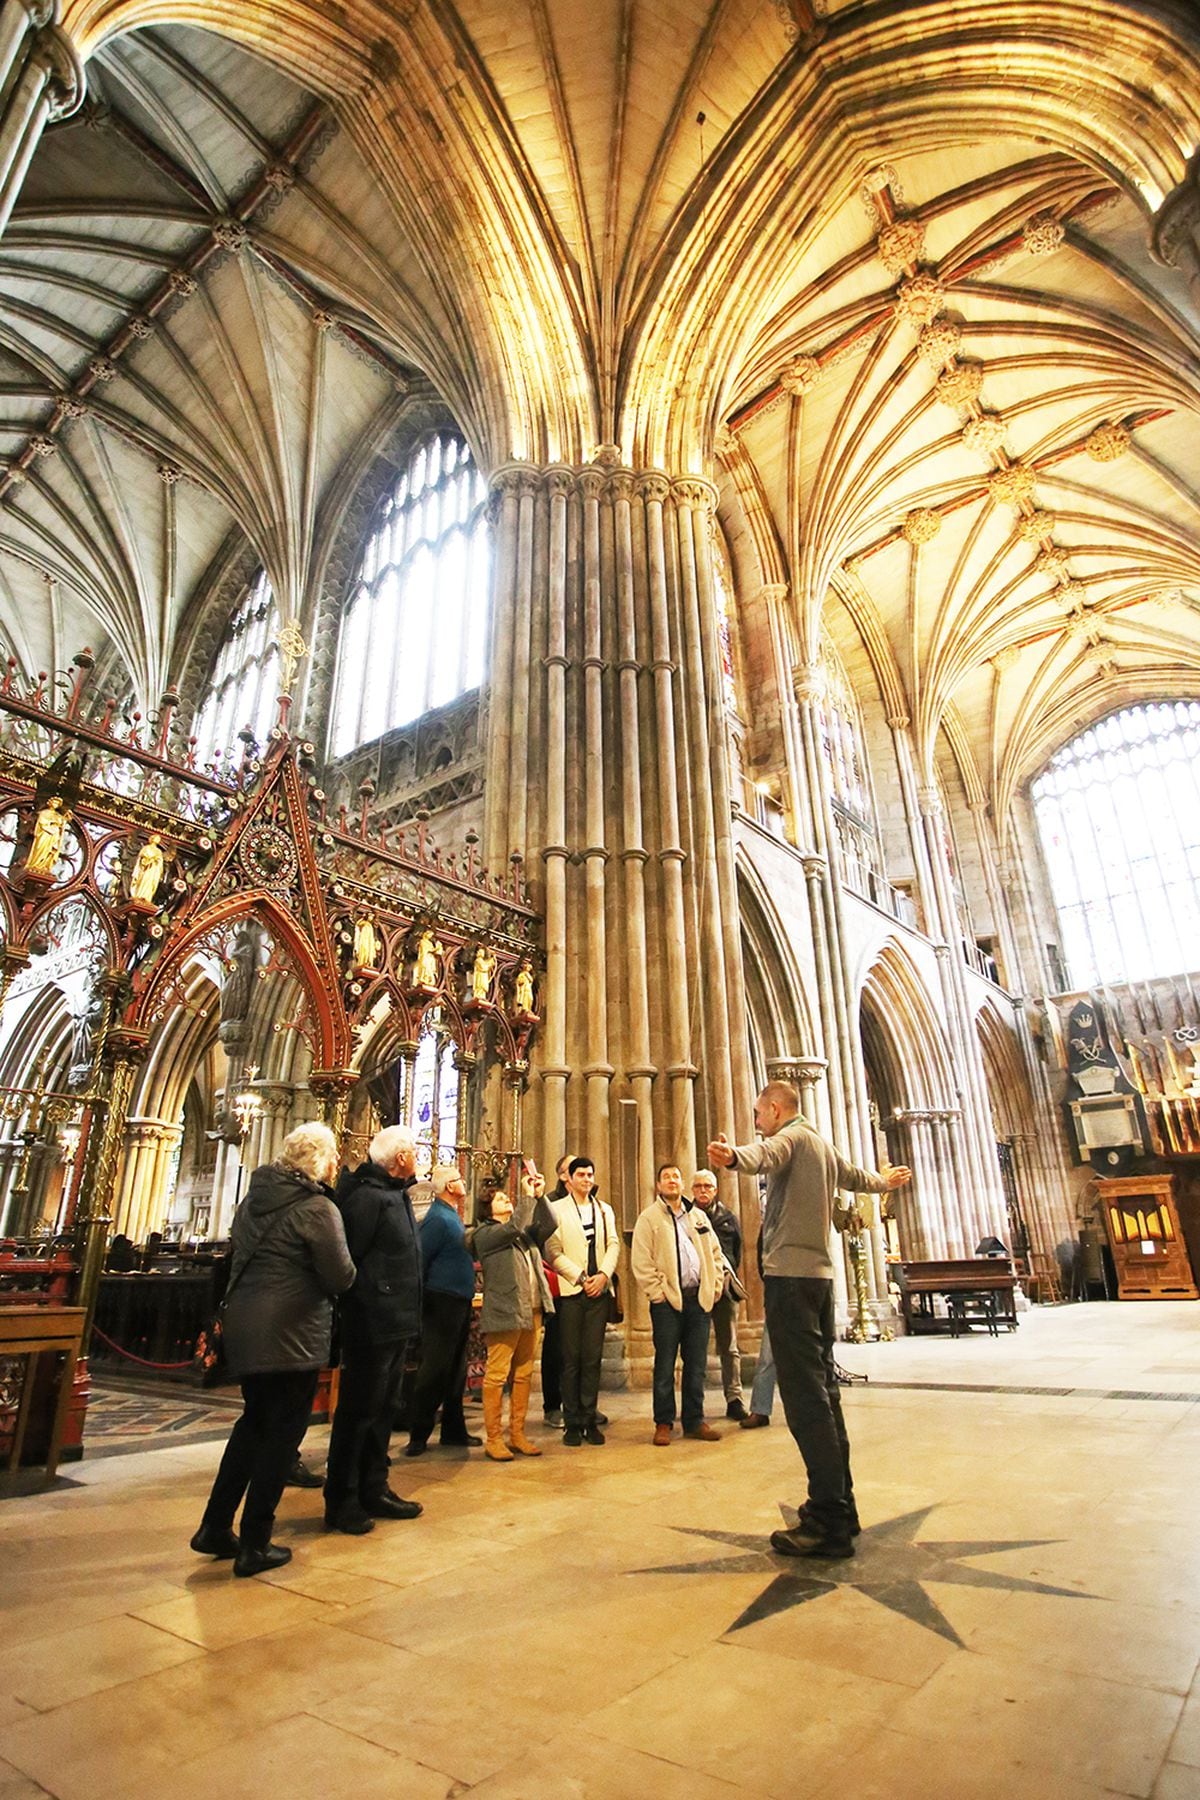 The different areas of the cathedral will be available to view on the tour